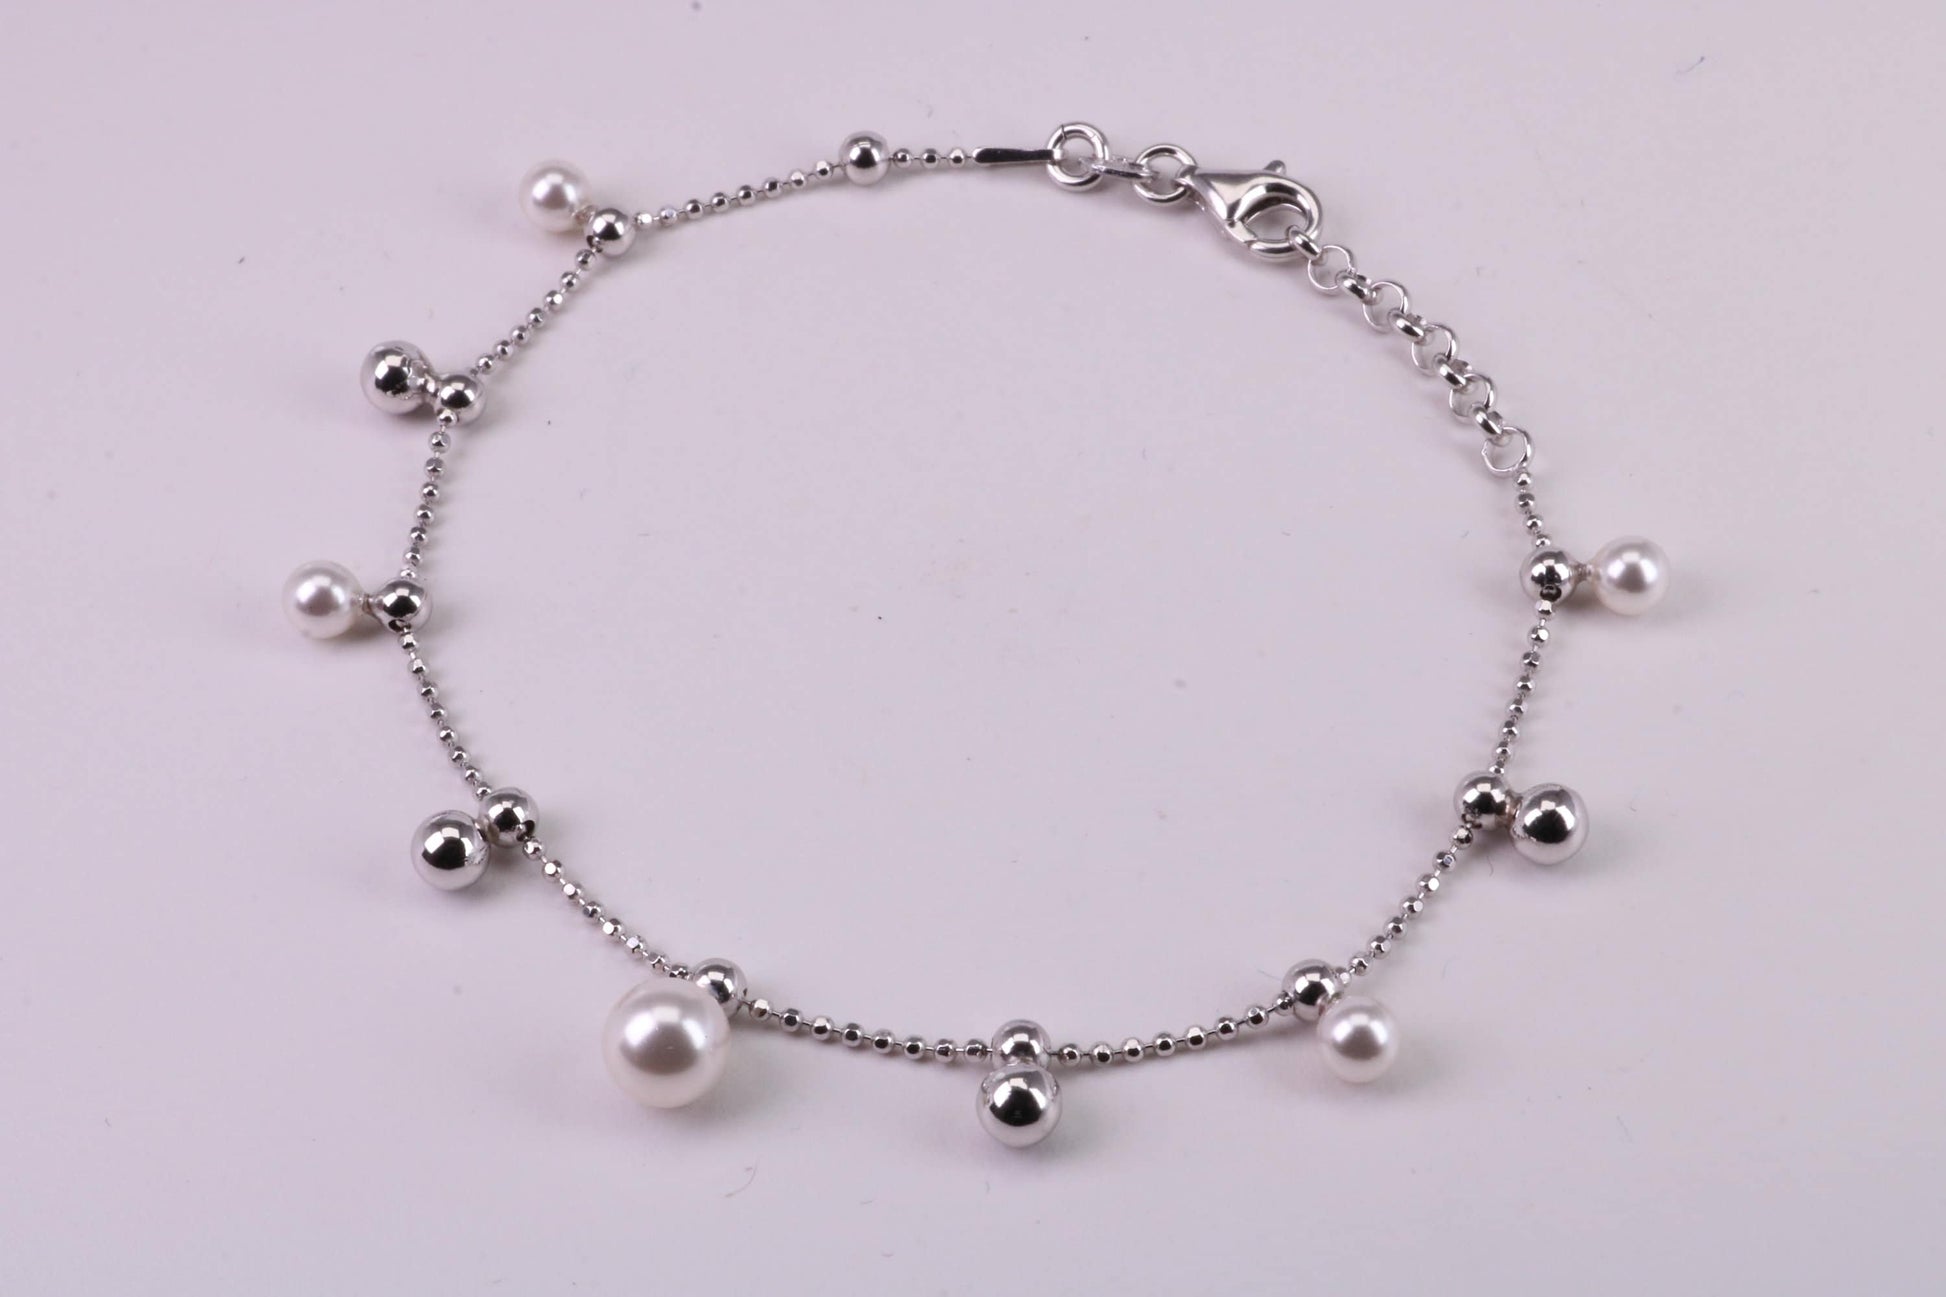 Pearl and Plain Bead Bracelet, With Length Adjustable Chain, Made from solid Sterling Silver